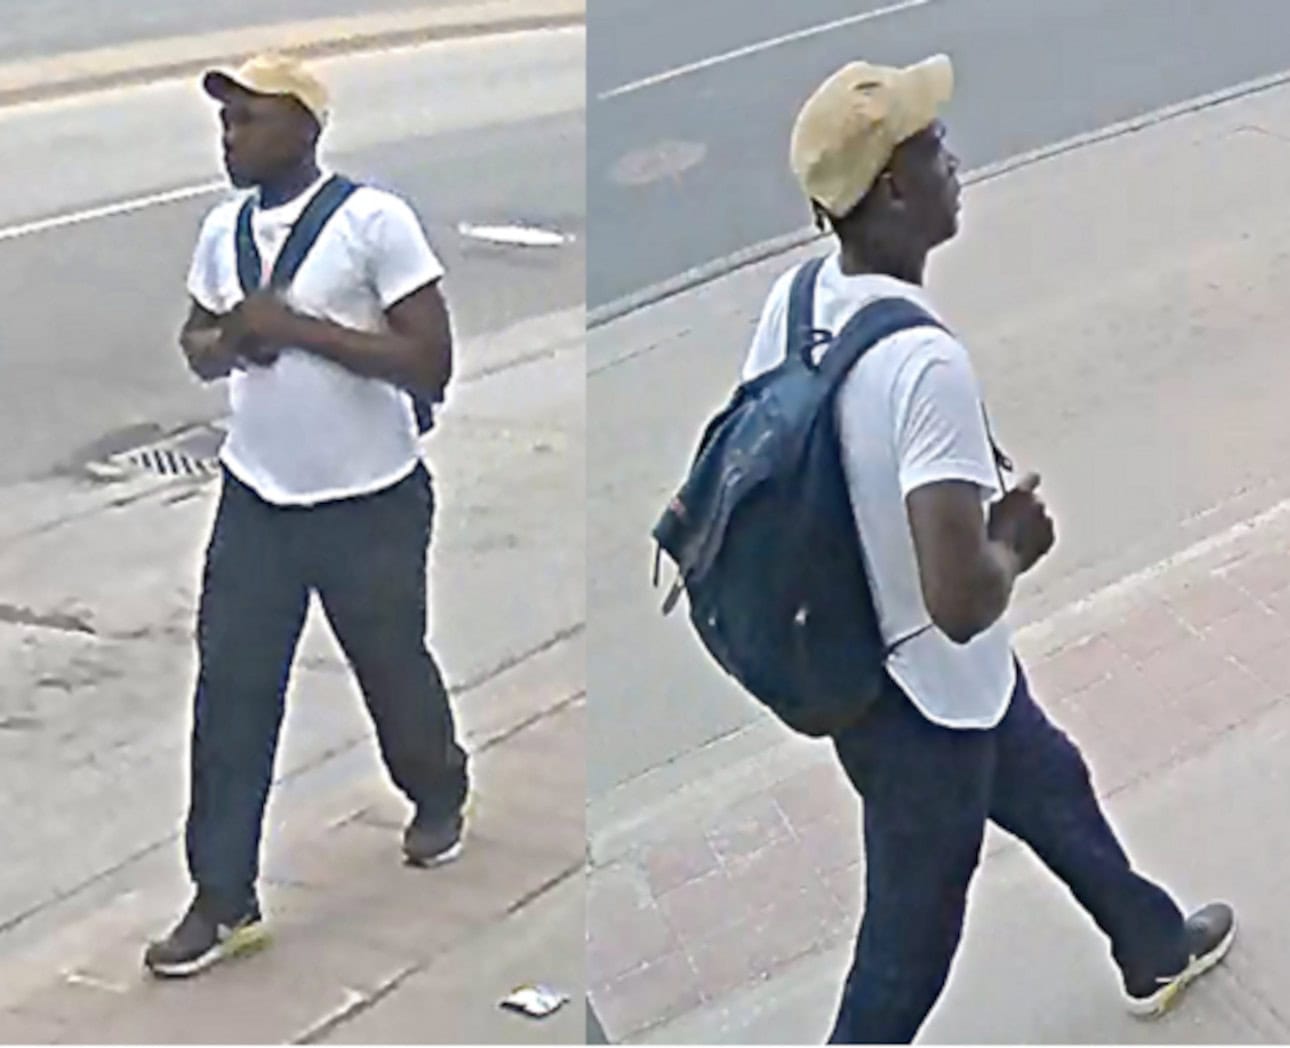 Hate-motivated assault suspect wanted in Brampton